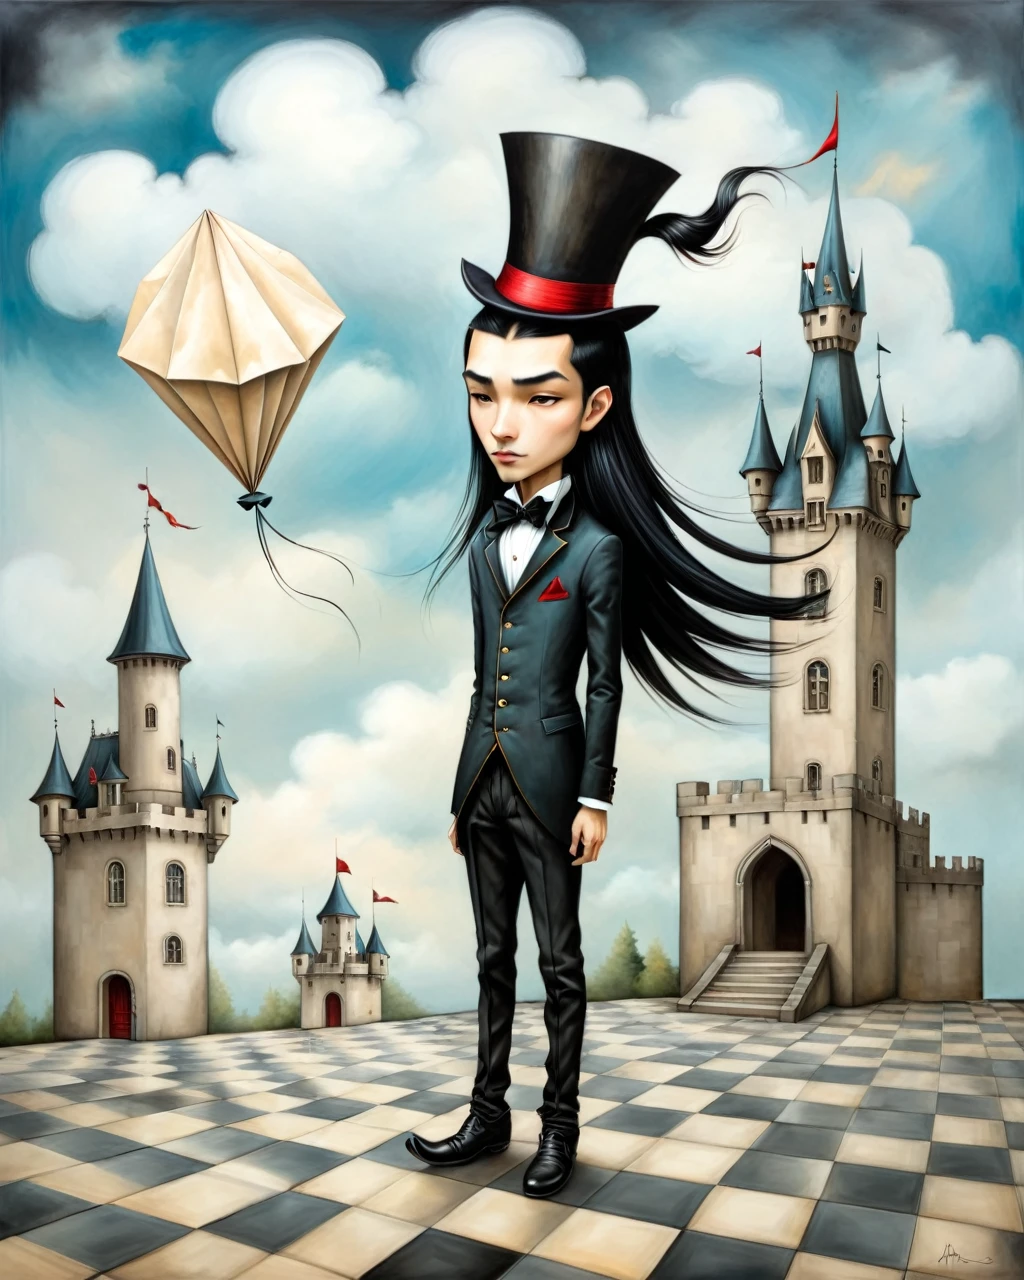 painting of a boy with top hat native american big nose long black hair standing in a courtyard castle on a cloud castle in the sky, mansion checkered floor origami style in the style of esao andrews,esao andrews style,esao andrews art,esao andrewsa  esao andrews, andrews esao artstyle, inspired by Esao Andrews, esao andrews ornate, by Esao Andrews, esao andrews, inspired by ESAO, by ESAO,  earley, esao andrews, benjamin lacombe, 1boy, in the style of esao andrews, esao andrews . paper art, pleated paper, folded, origami art, pleats, cut and fold, 